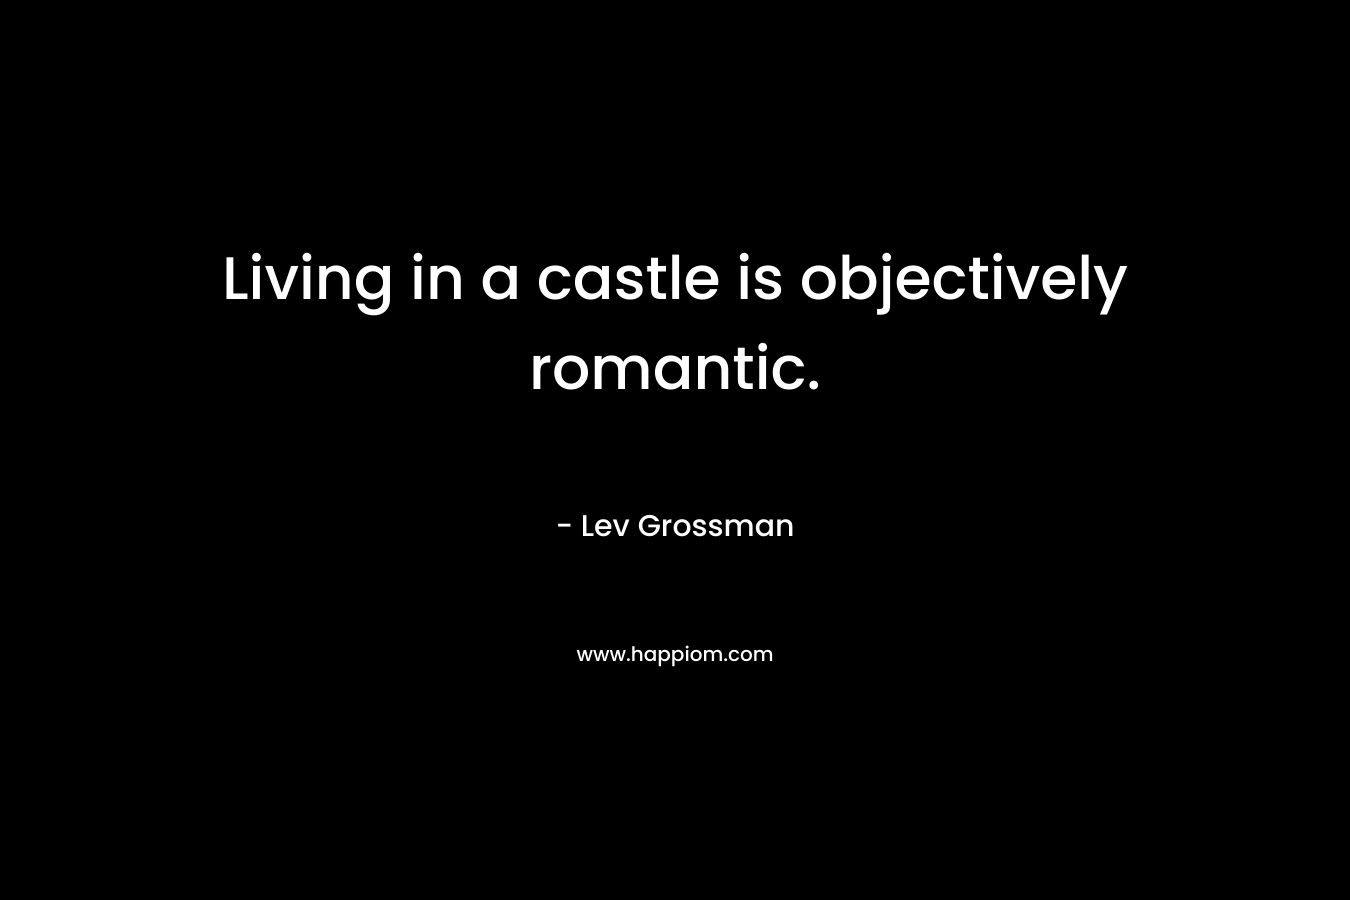 Living in a castle is objectively romantic.